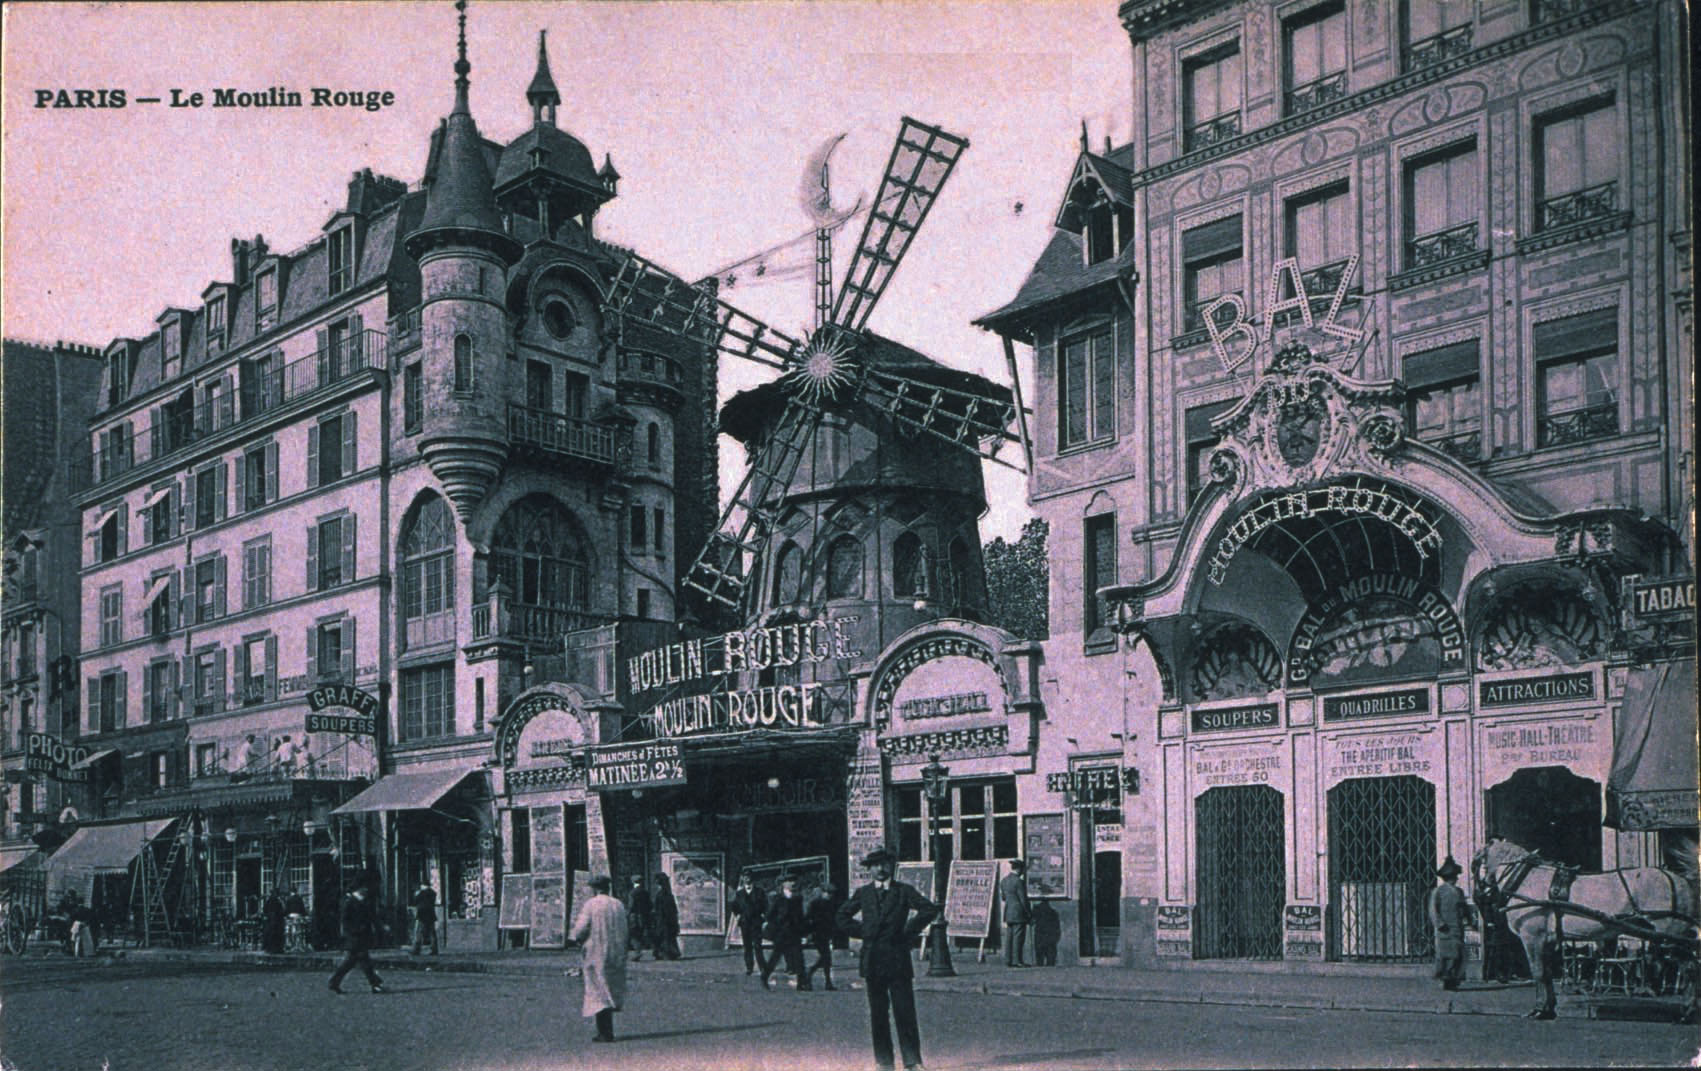 Facade of Moulin Rouge 1900